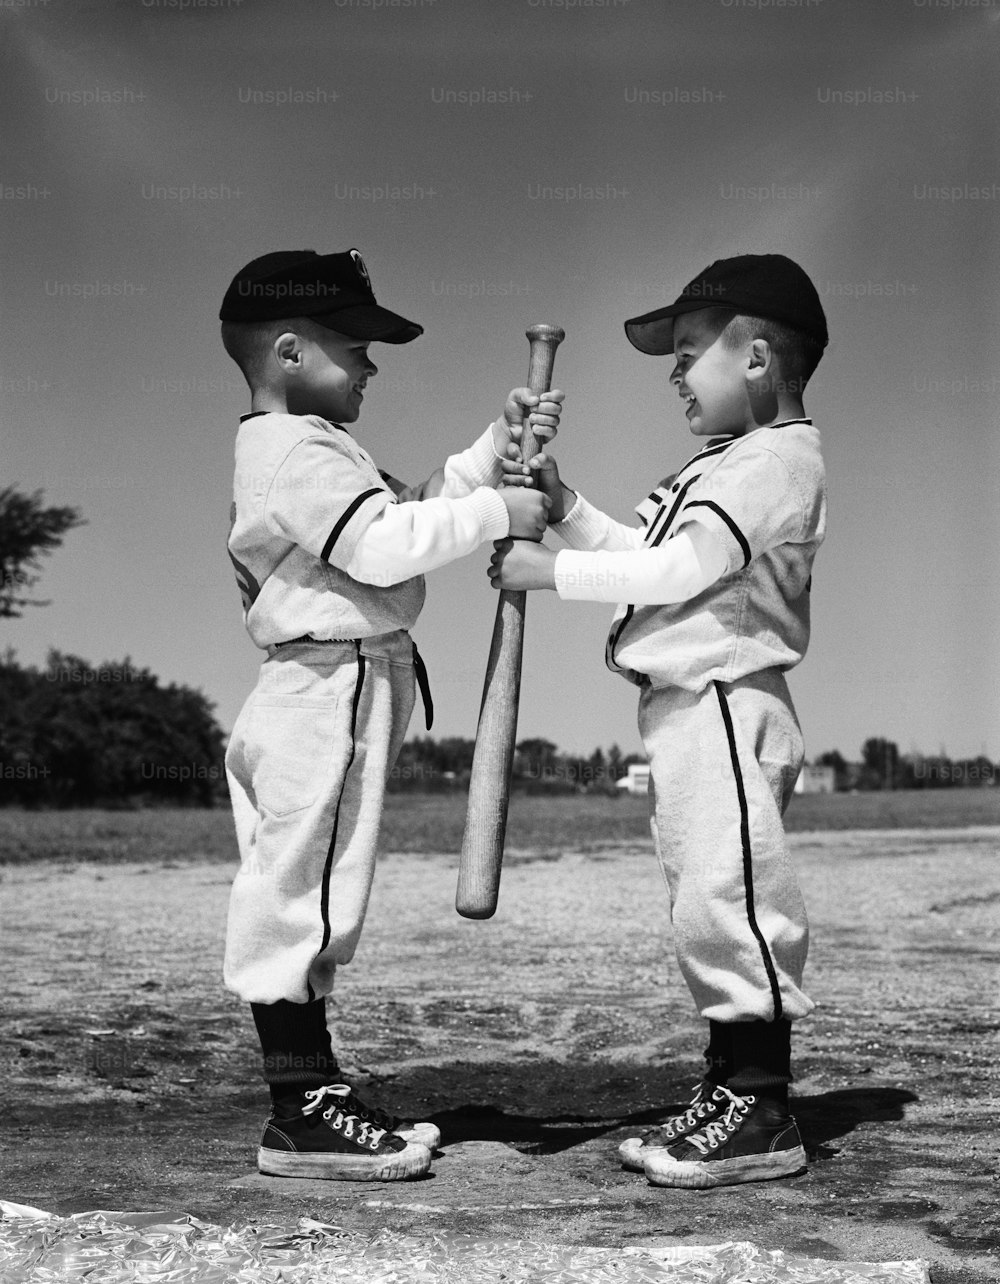 UNITED STATES - CIRCA 1960s:  Two boys in Little League uniforms, facing each other, holding baseball bat.